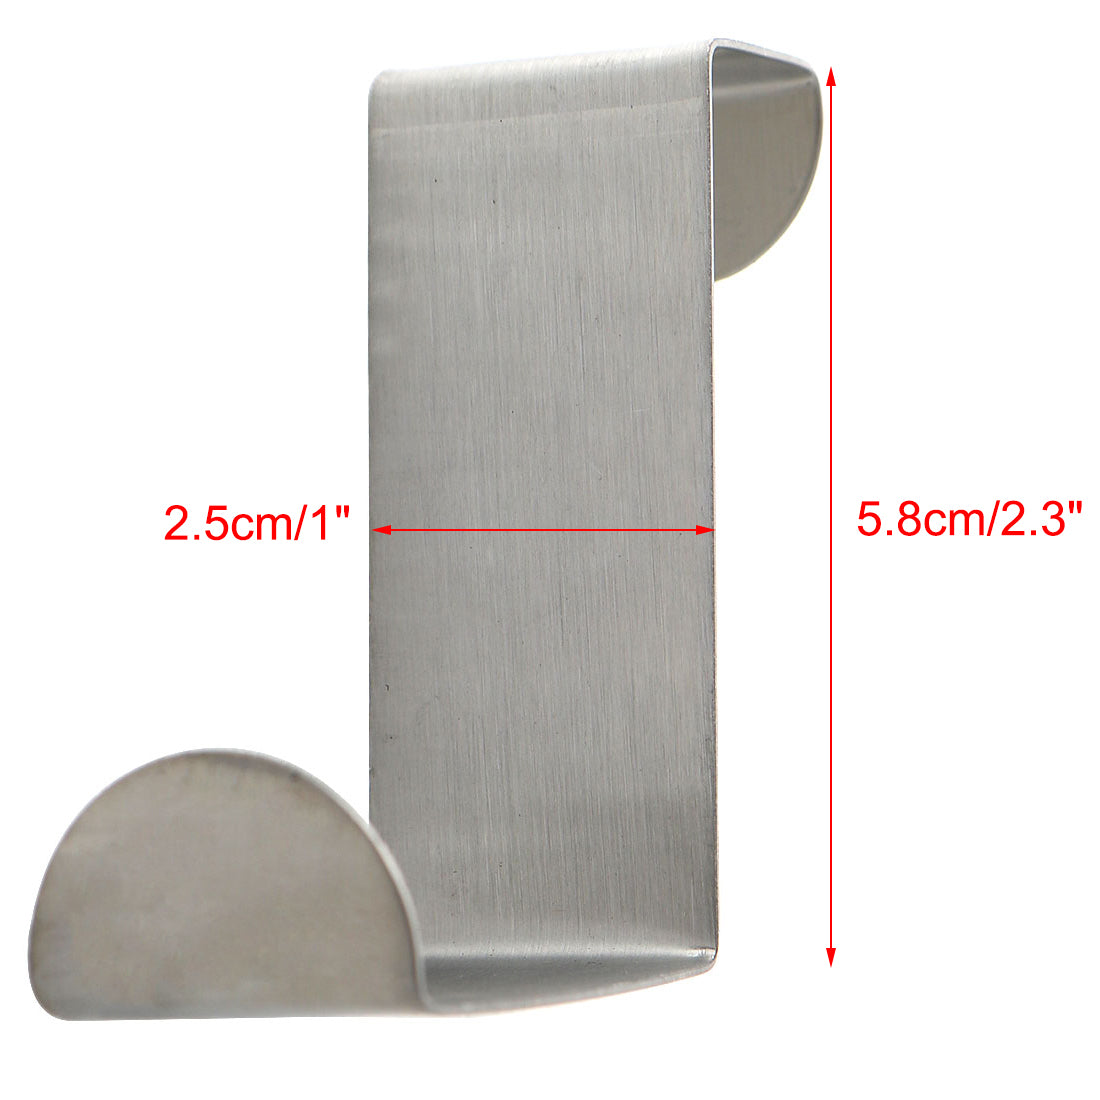 uxcell Uxcell Household Metal Z Shaped Over Door Hooks Clothes Towel Hanger Holder Silver Tone 2 Pcs